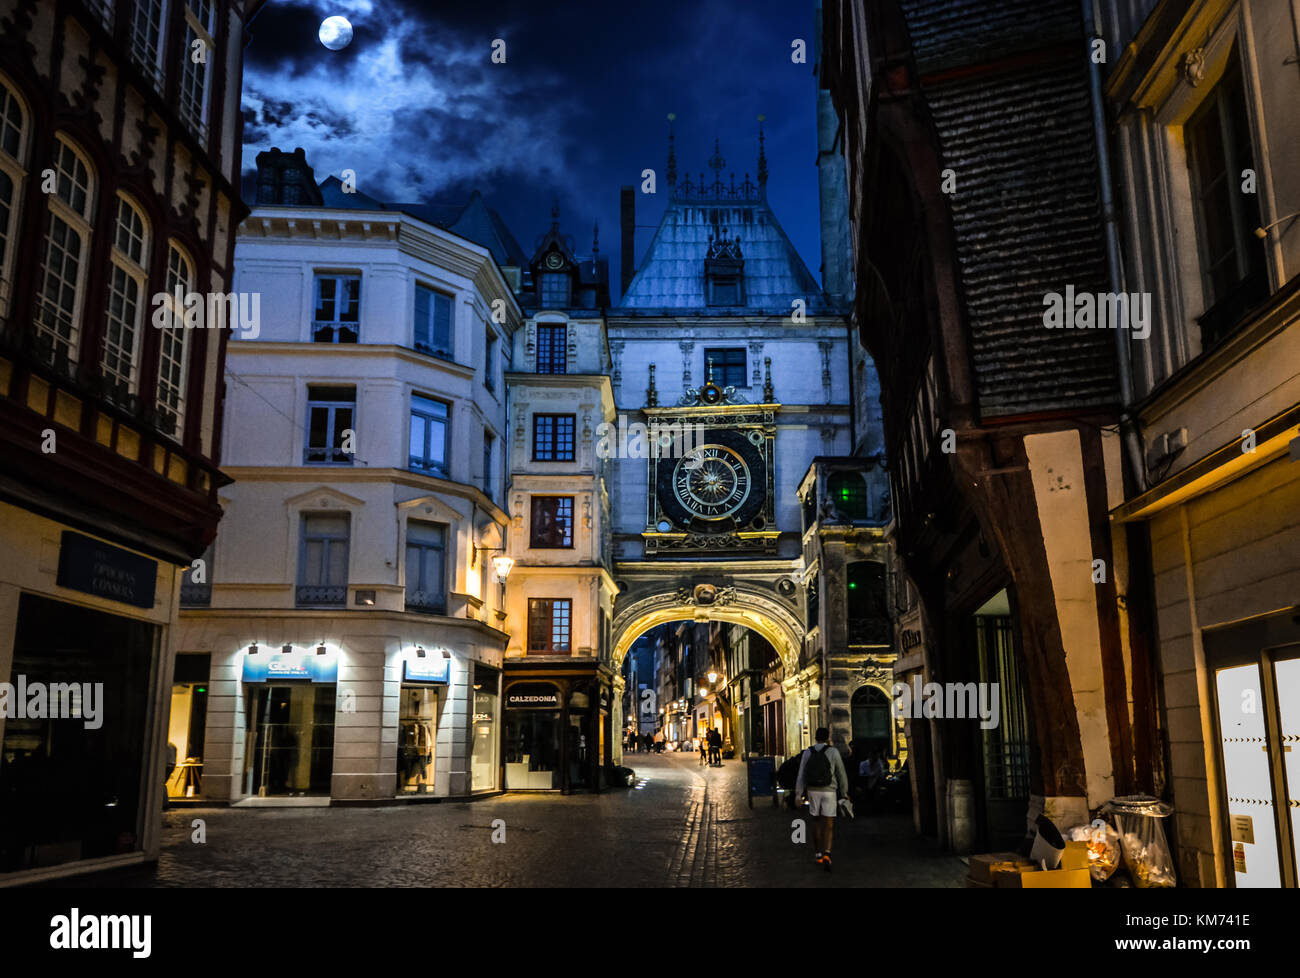 The historic astronomical clock, gros horlage in the medieval city of Rouen France in the Normandy Region. Taken at night with a full moon Stock Photo